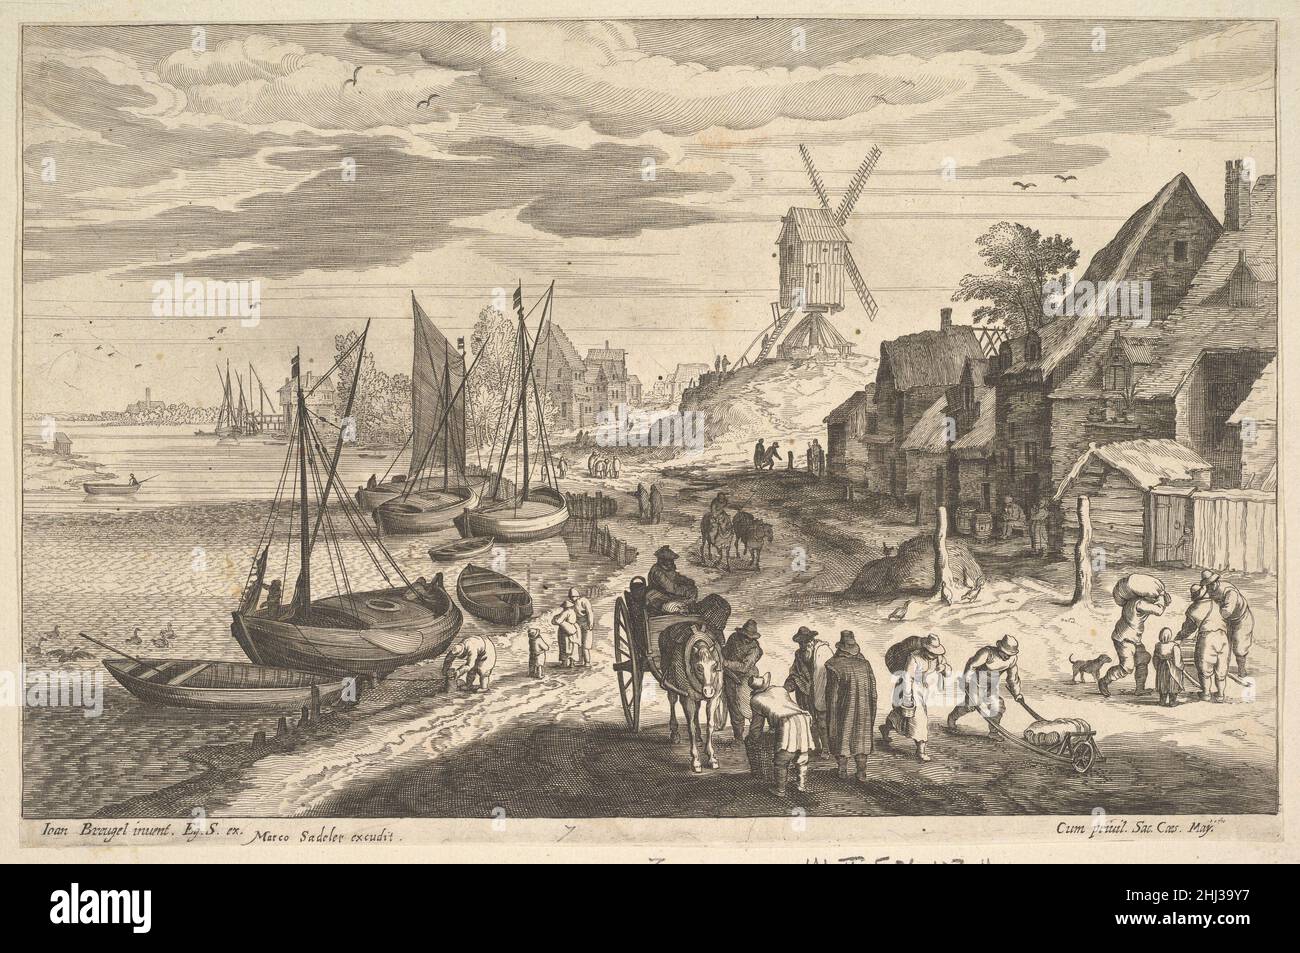 Coast Scene with a Windmill n.d. Aegidius Sadeler II Netherlandish. Coast Scene with a Windmill  382733 Artist: Aegidius Sadeler II, Netherlandish, Antwerp 1568?1629 Prague, Artist: After Jan Brueghel the Elder, Netherlandish, Brussels 1568?1625 Antwerp, Publisher: Marcus Sadeler, German, Munich before 1614?in or after 1650, Coast Scene with a Windmill, n.d., Engraving; second state, sheet: 7 3/8 x 11 1/4 in. (18.7 x 28.6 cm). The Metropolitan Museum of Art, New York. The Elisha Whittelsey Collection, The Elisha Whittelsey Fund, 1949 (49.95.1413) Stock Photo